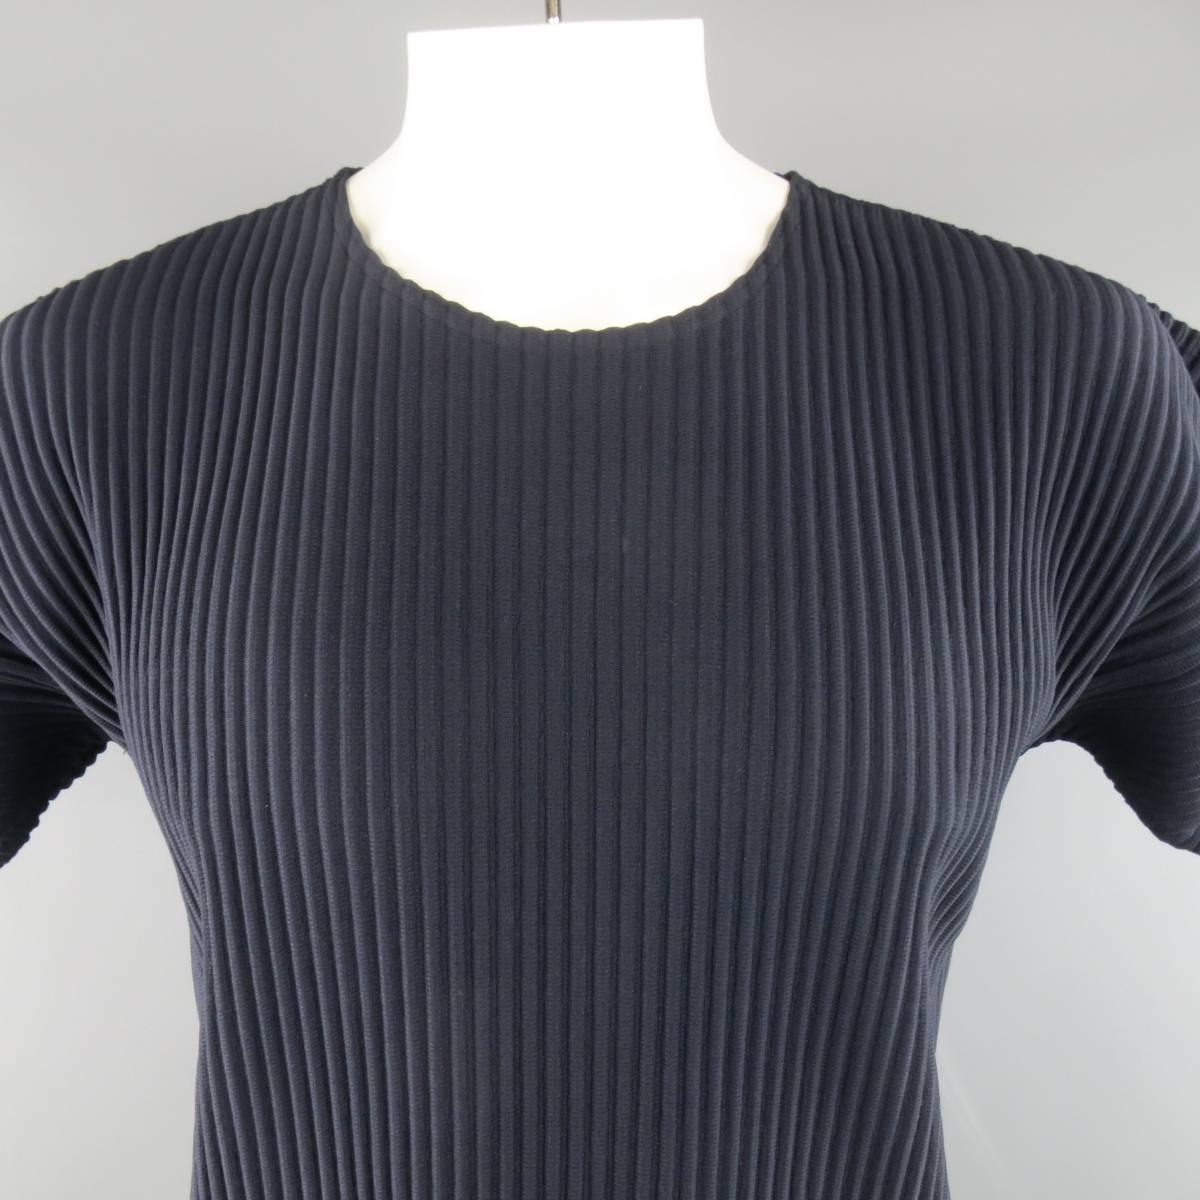 ISSEY MIYAKE HOMME PLISSE T-shirt comes in a deep navy blue thick ribbed pleated polyester and features a 2D construction with w crewneck and square sleeves.
 
Excellent Pre-Owned Condition.
Marked: JP 4
 
Measurements:
 
Shoulder: 24 in.
Chest: 44